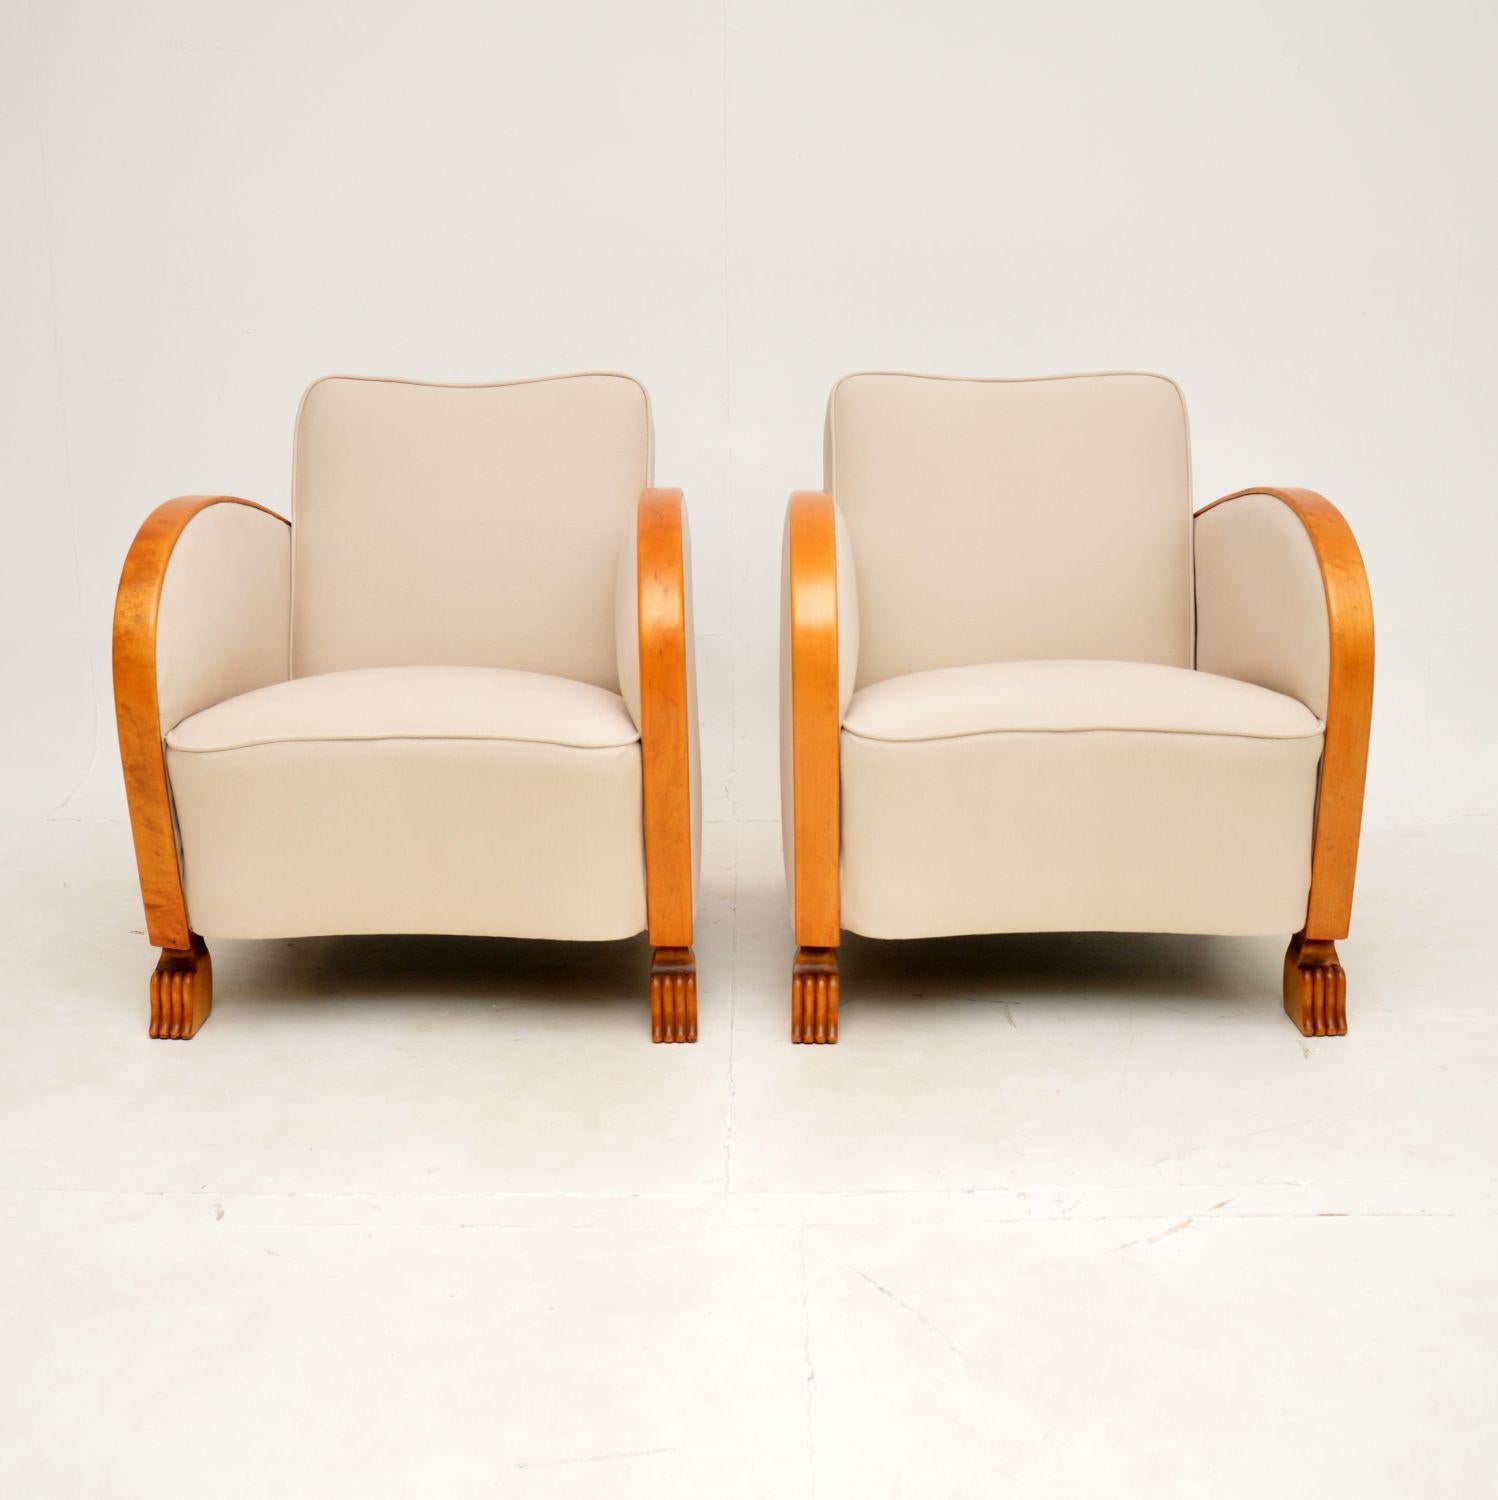 A very stylish and extremely well made pair of Swedish Art Deco period armchairs. They were recently imported from Sweden, they date from the 1920s-1930s.

They have lovely proportions and are very comfortable. The quality is amazing, they have